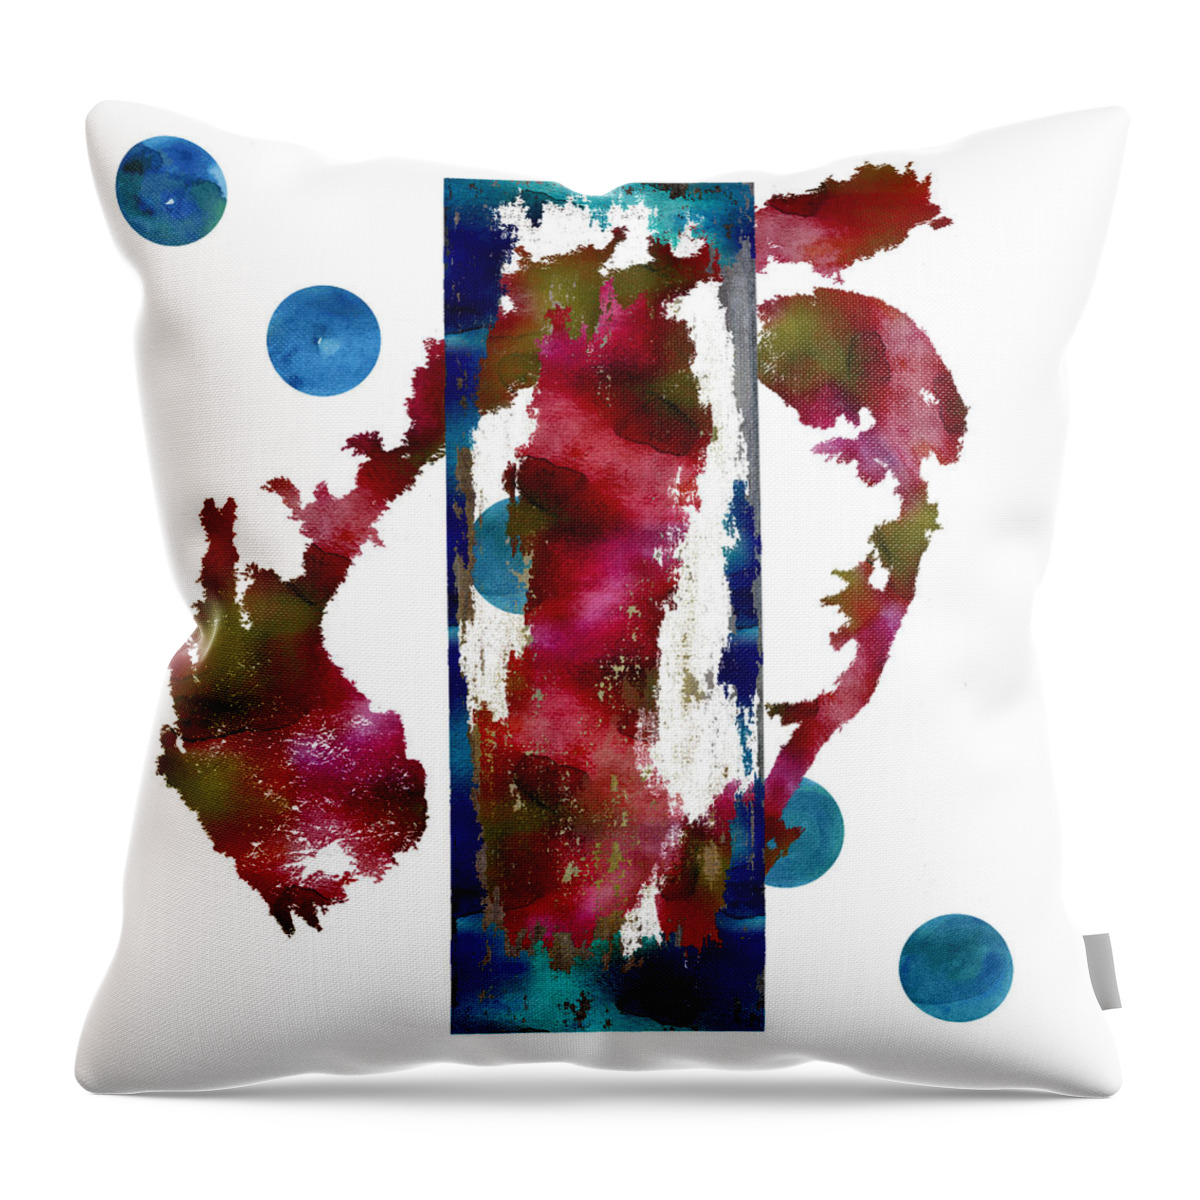 Watercolor Throw Pillow featuring the painting Watercolor Abstract 1 by Kandy Hurley